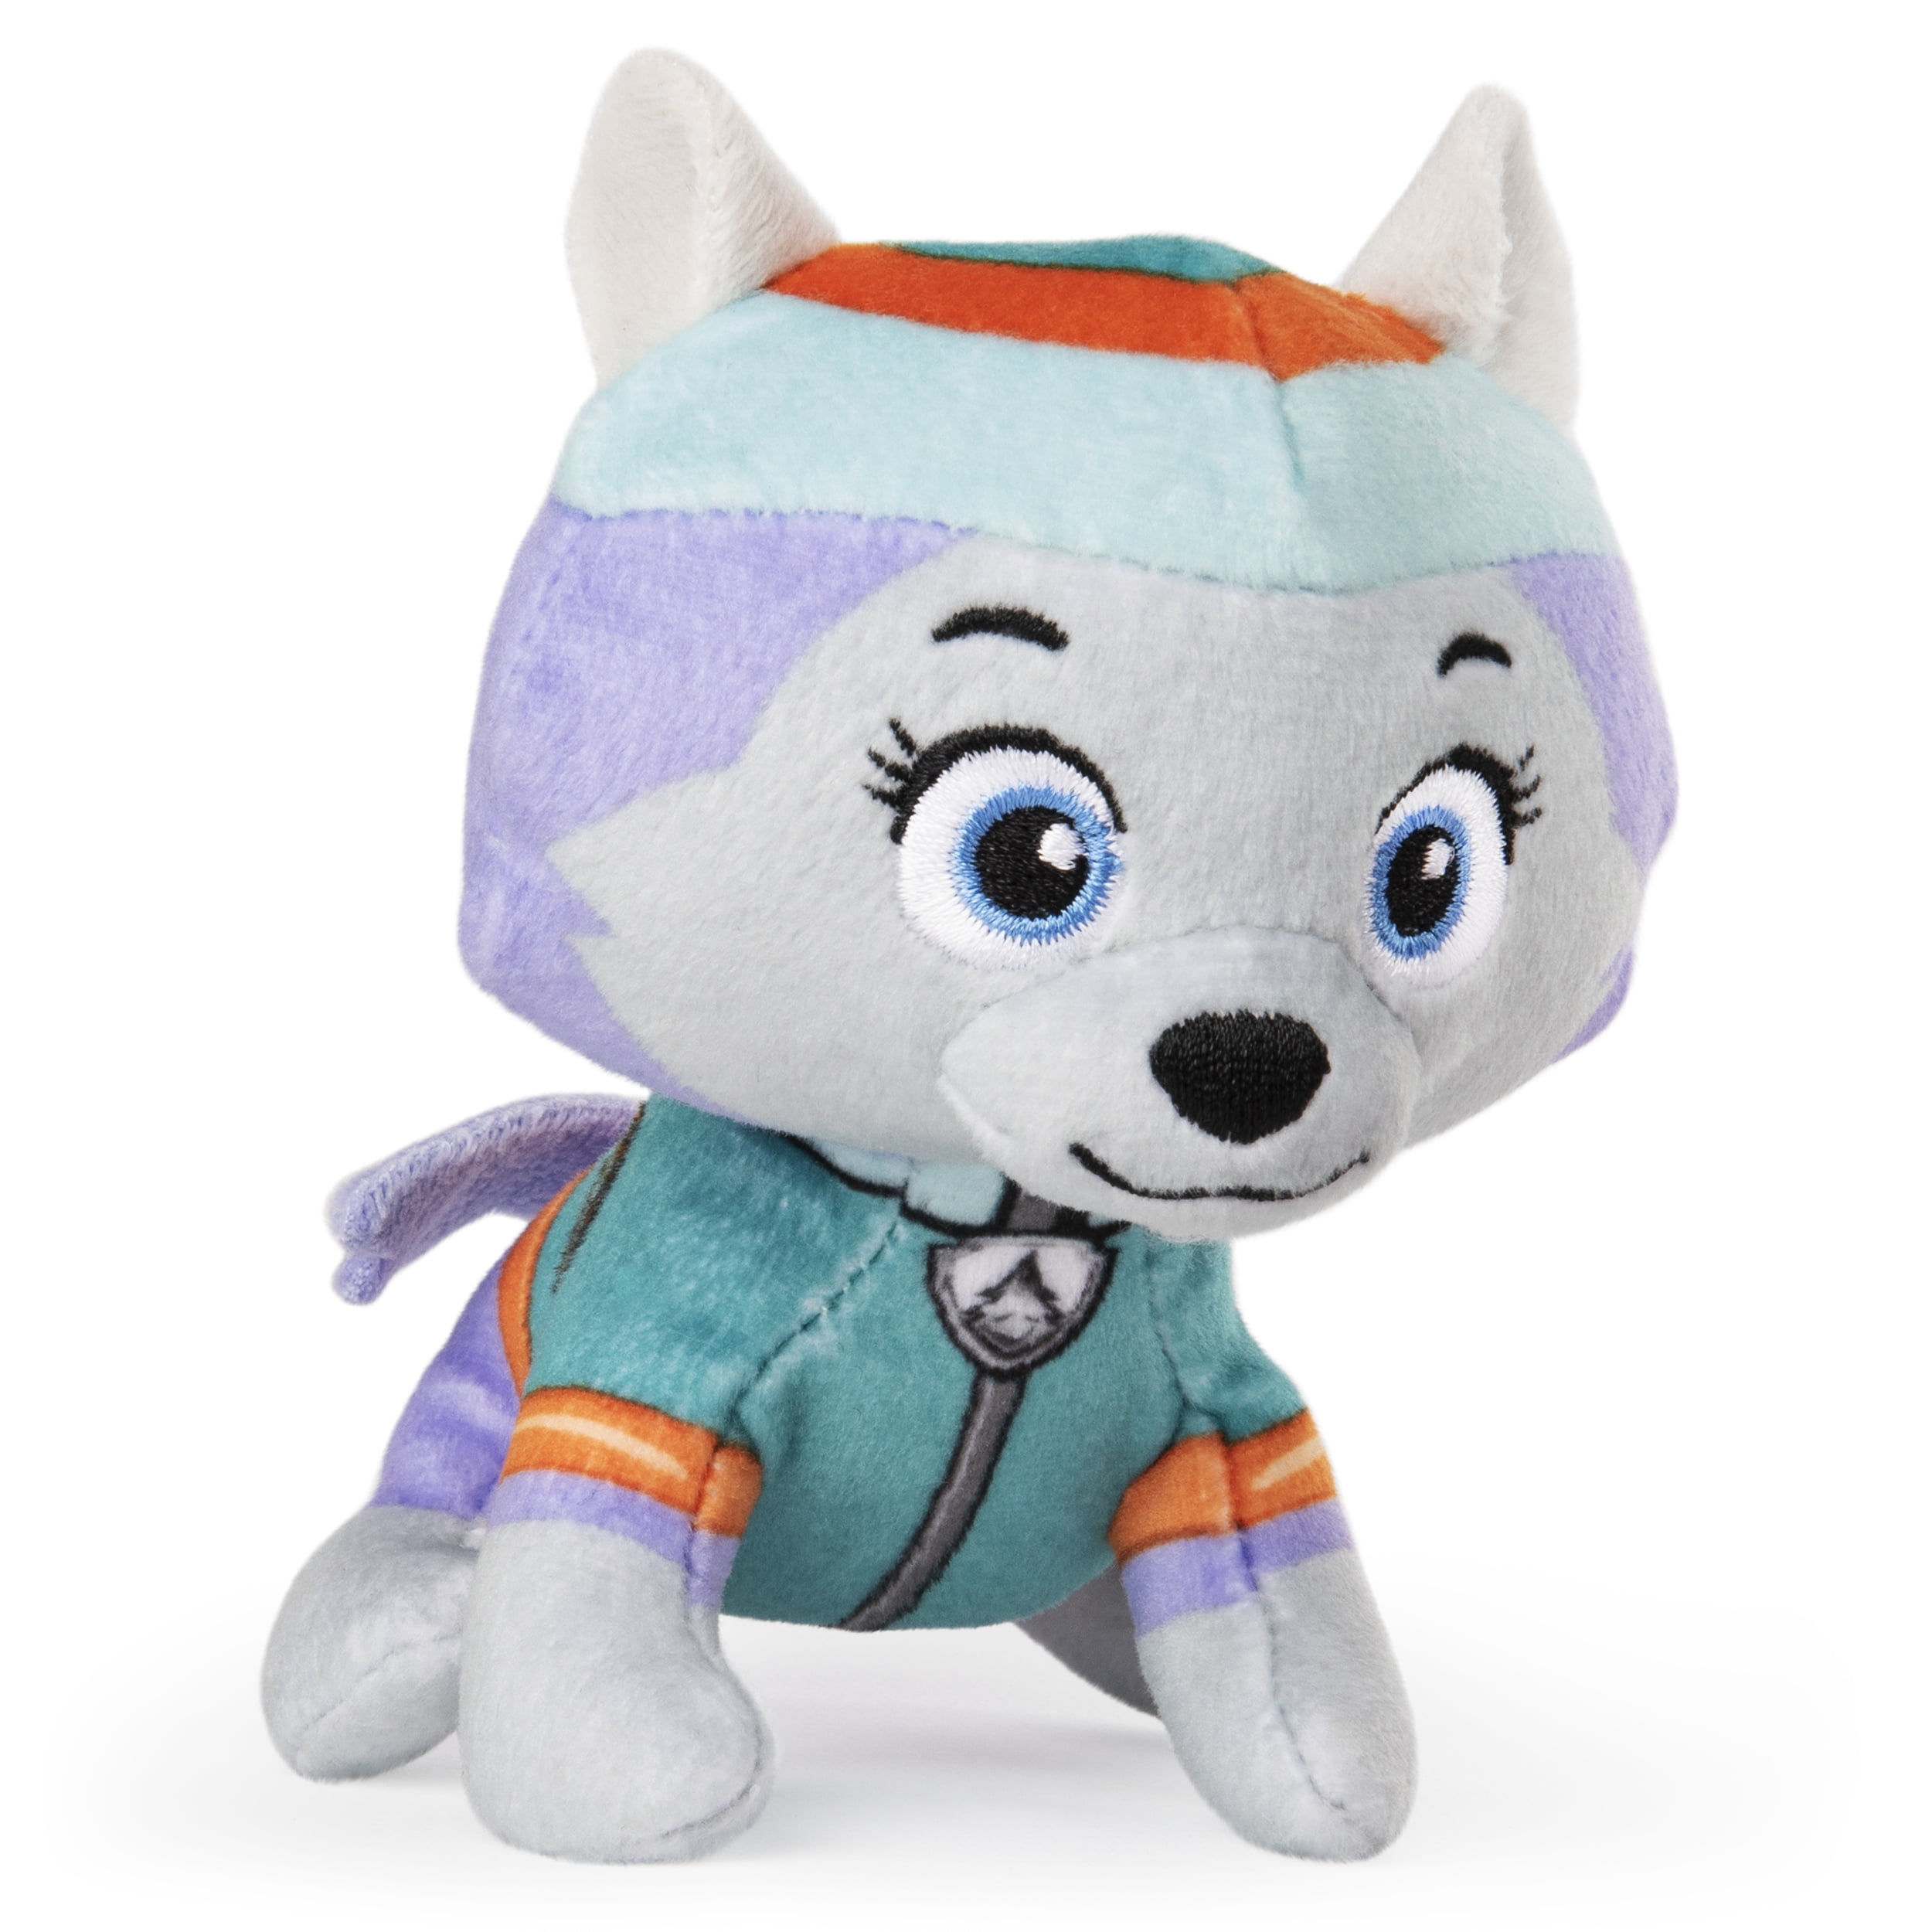 Klimatiske bjerge indre TRUE PAW Patrol, 5-inch Everest Mini Plush Pup, for Ages 3 and up - Walmart.com